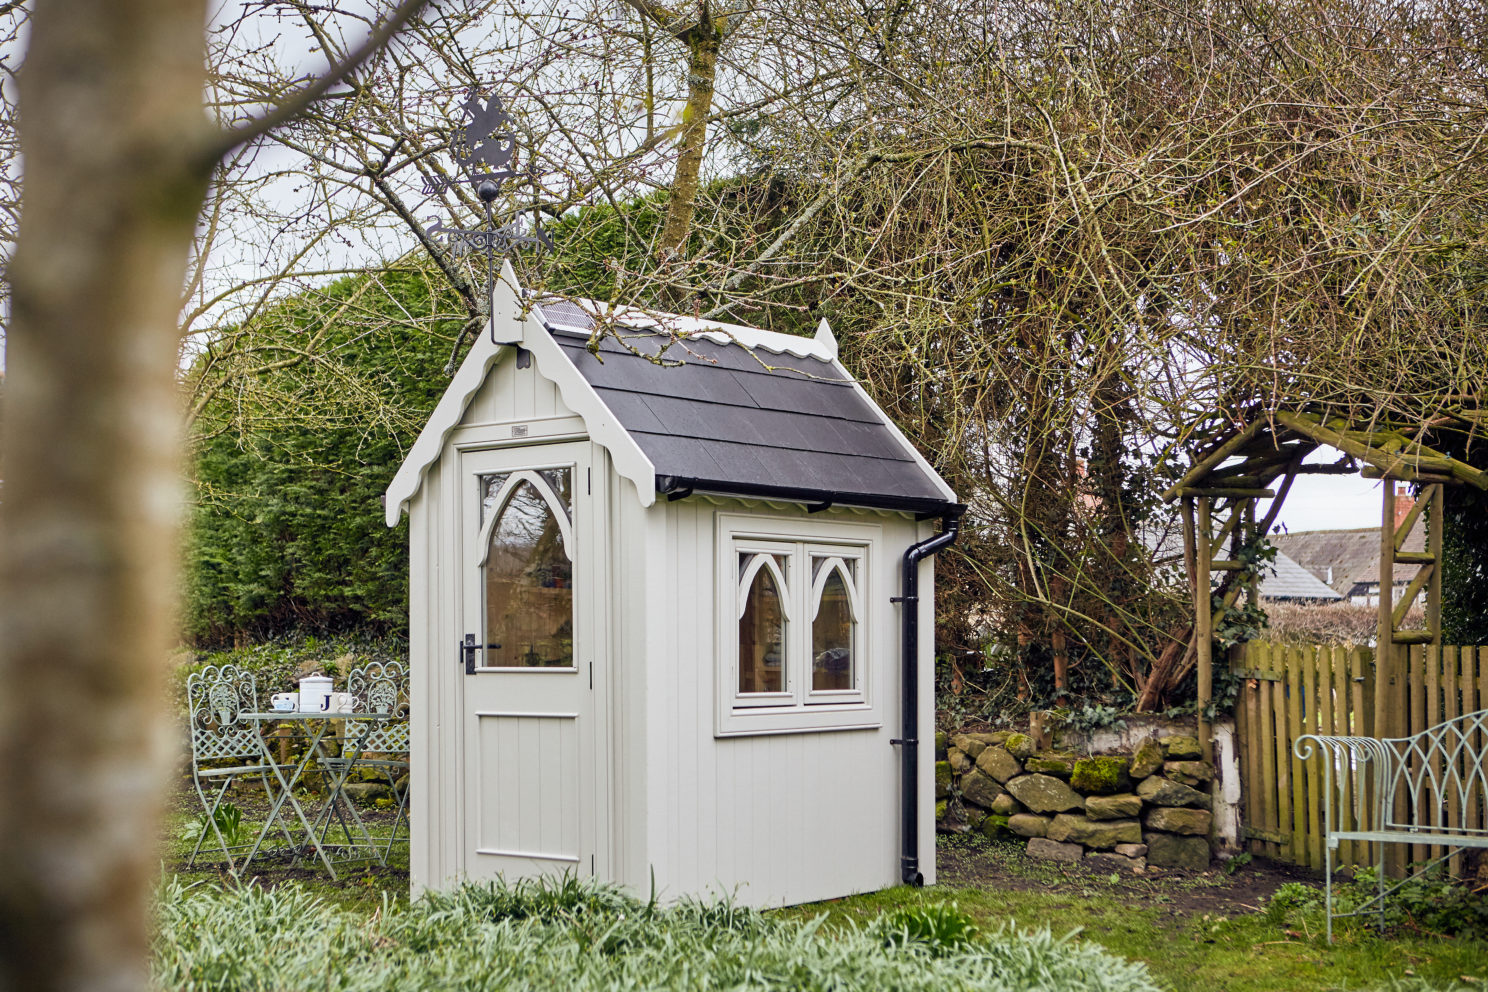 The Gothic Shed